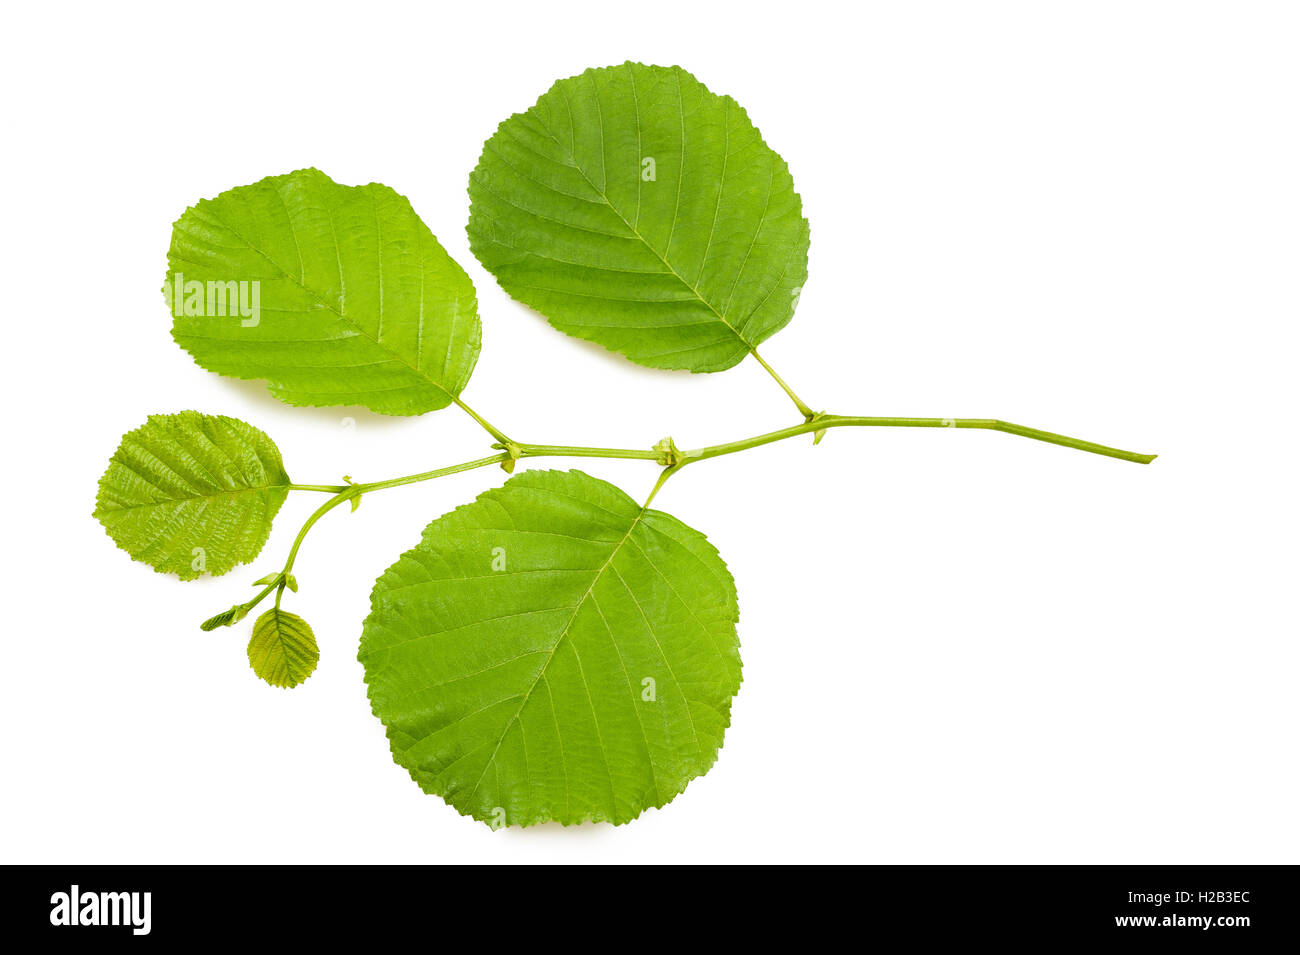 Hazel branch isolated on white Banque D'Images